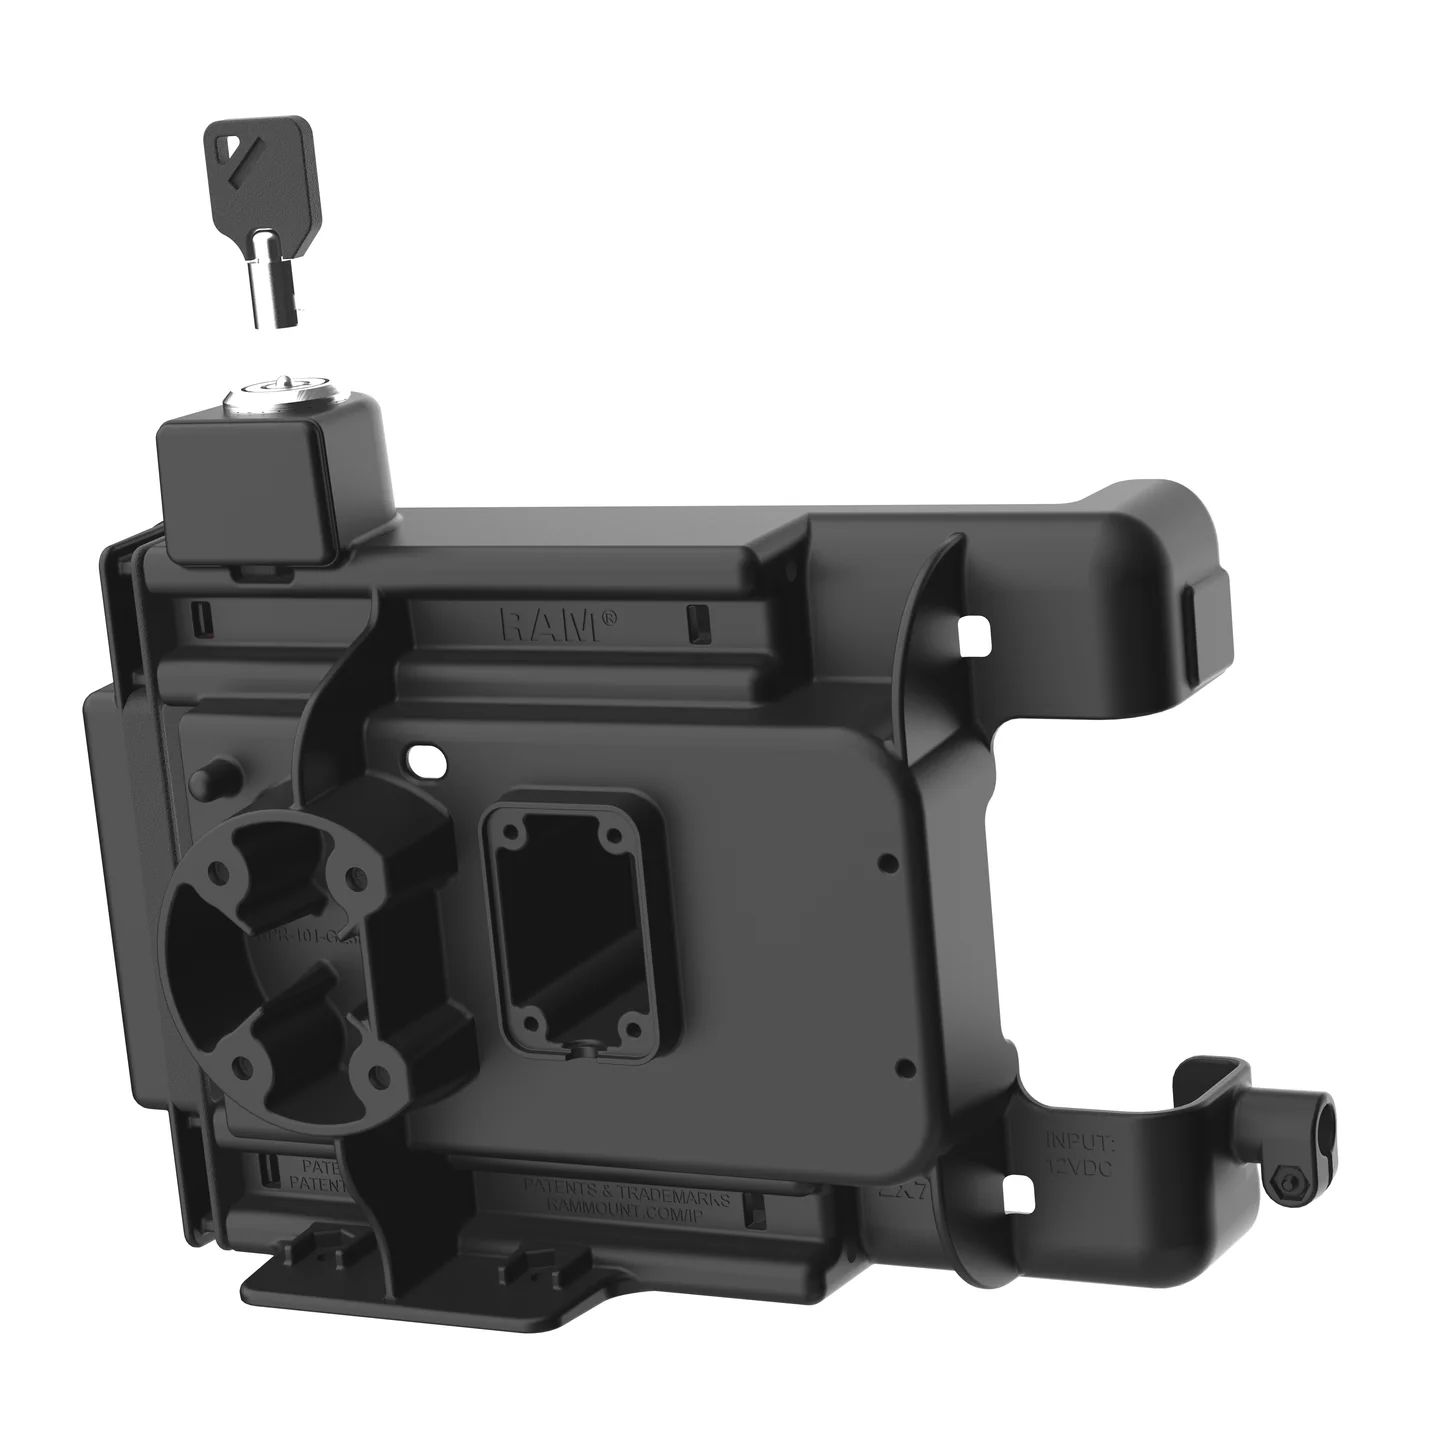 RAM Getax Cradle for ZX70 7" Rugged Tablet